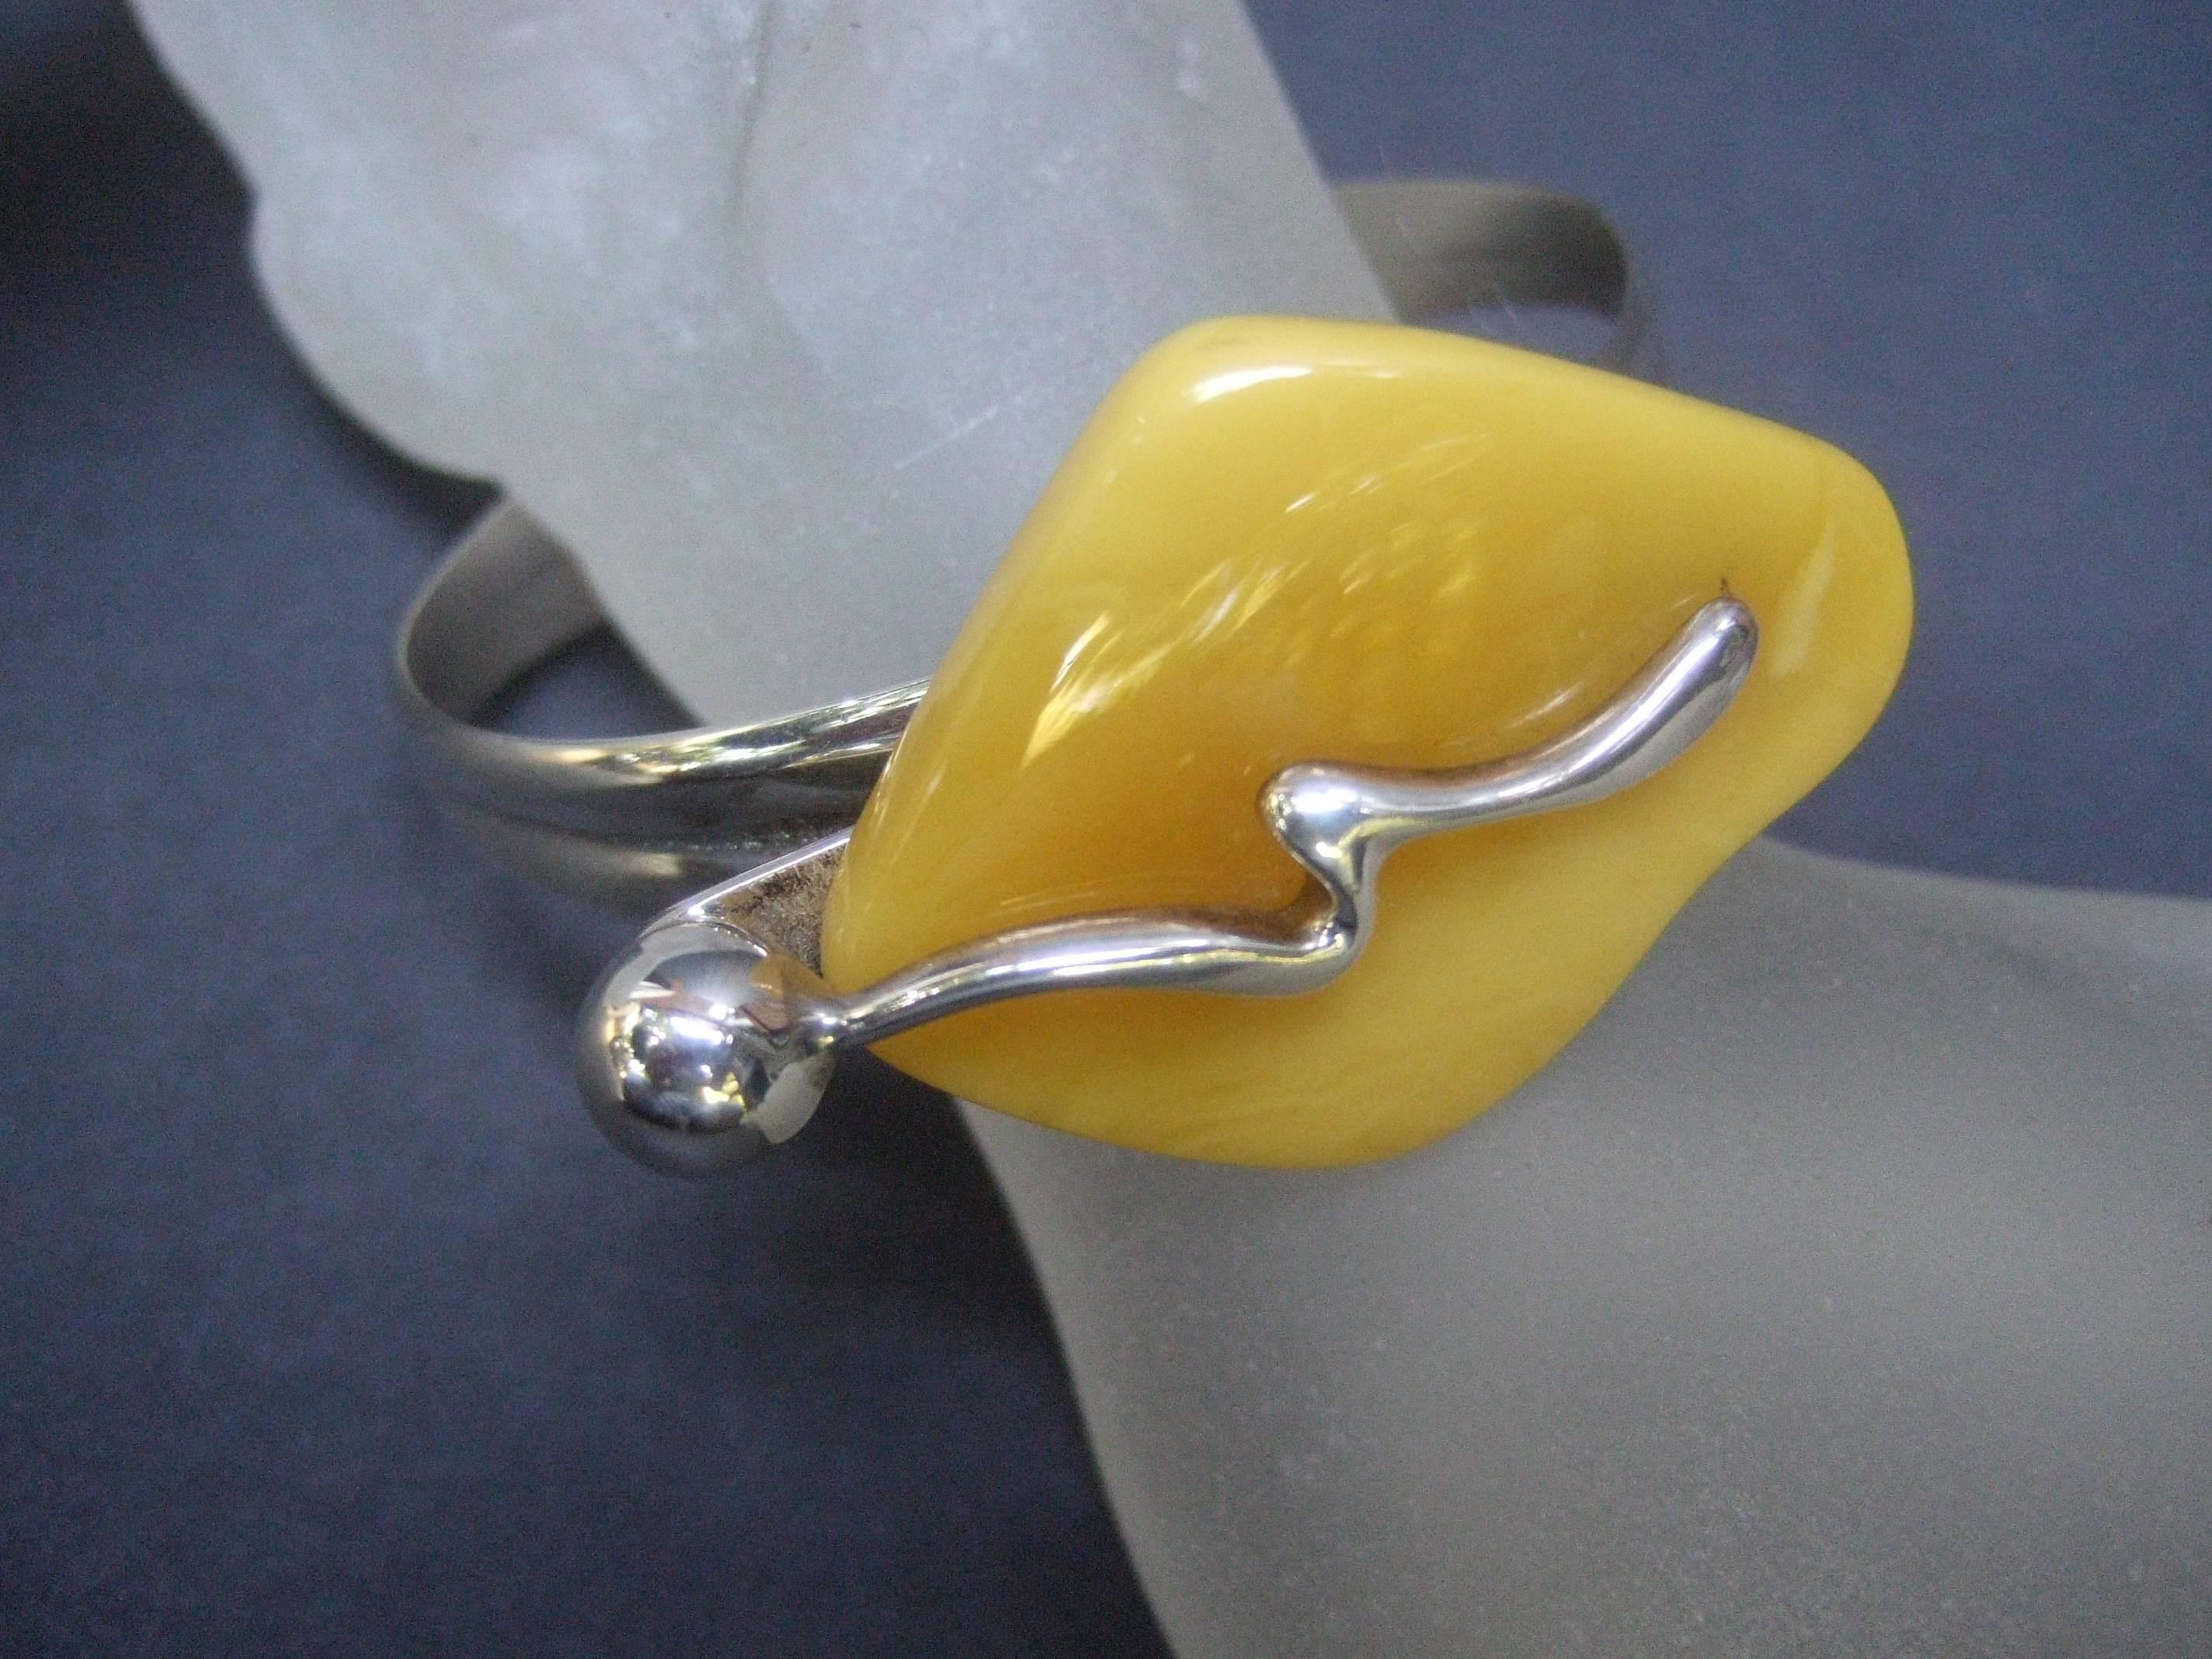 Sterling silver baltic amber modernist style bracelet
The artisan bracelet is designed with a large slice
of baltic amber adhered to a sterling metal band

The slice of baltic amber is designed with sterling
scrolled streak across the top with